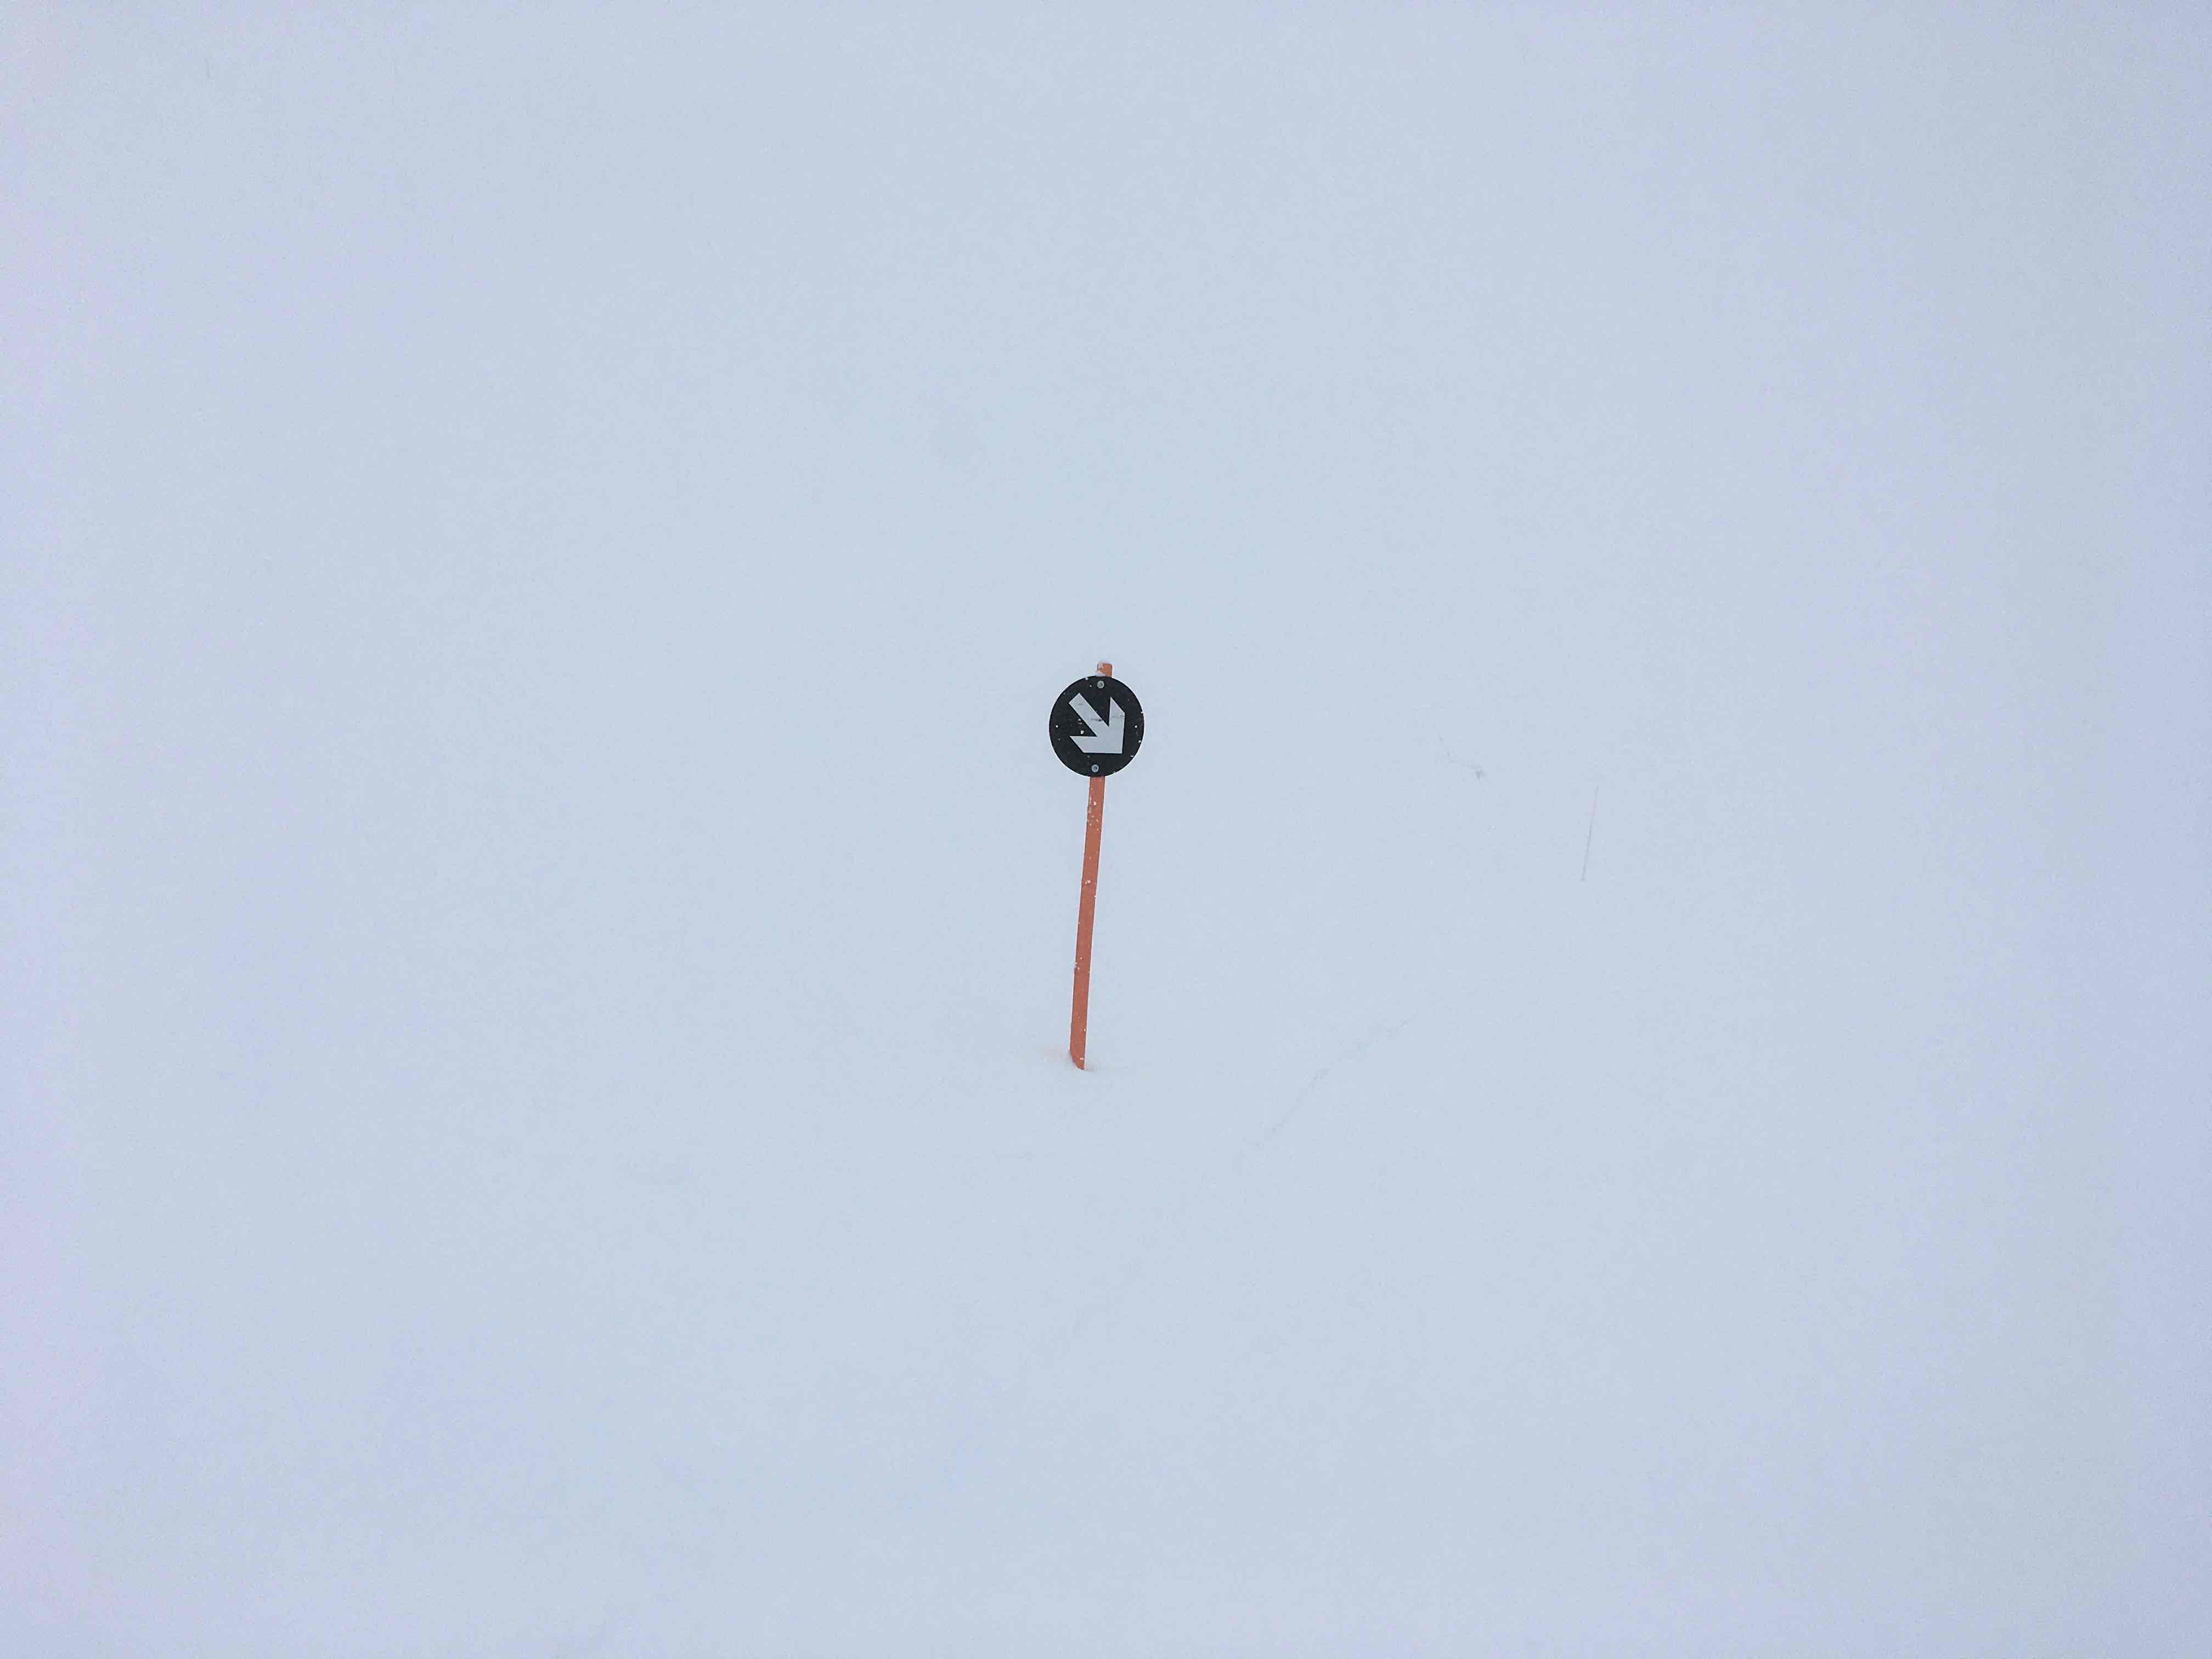 Ski run arrow marker with nothing else but pure white visible.